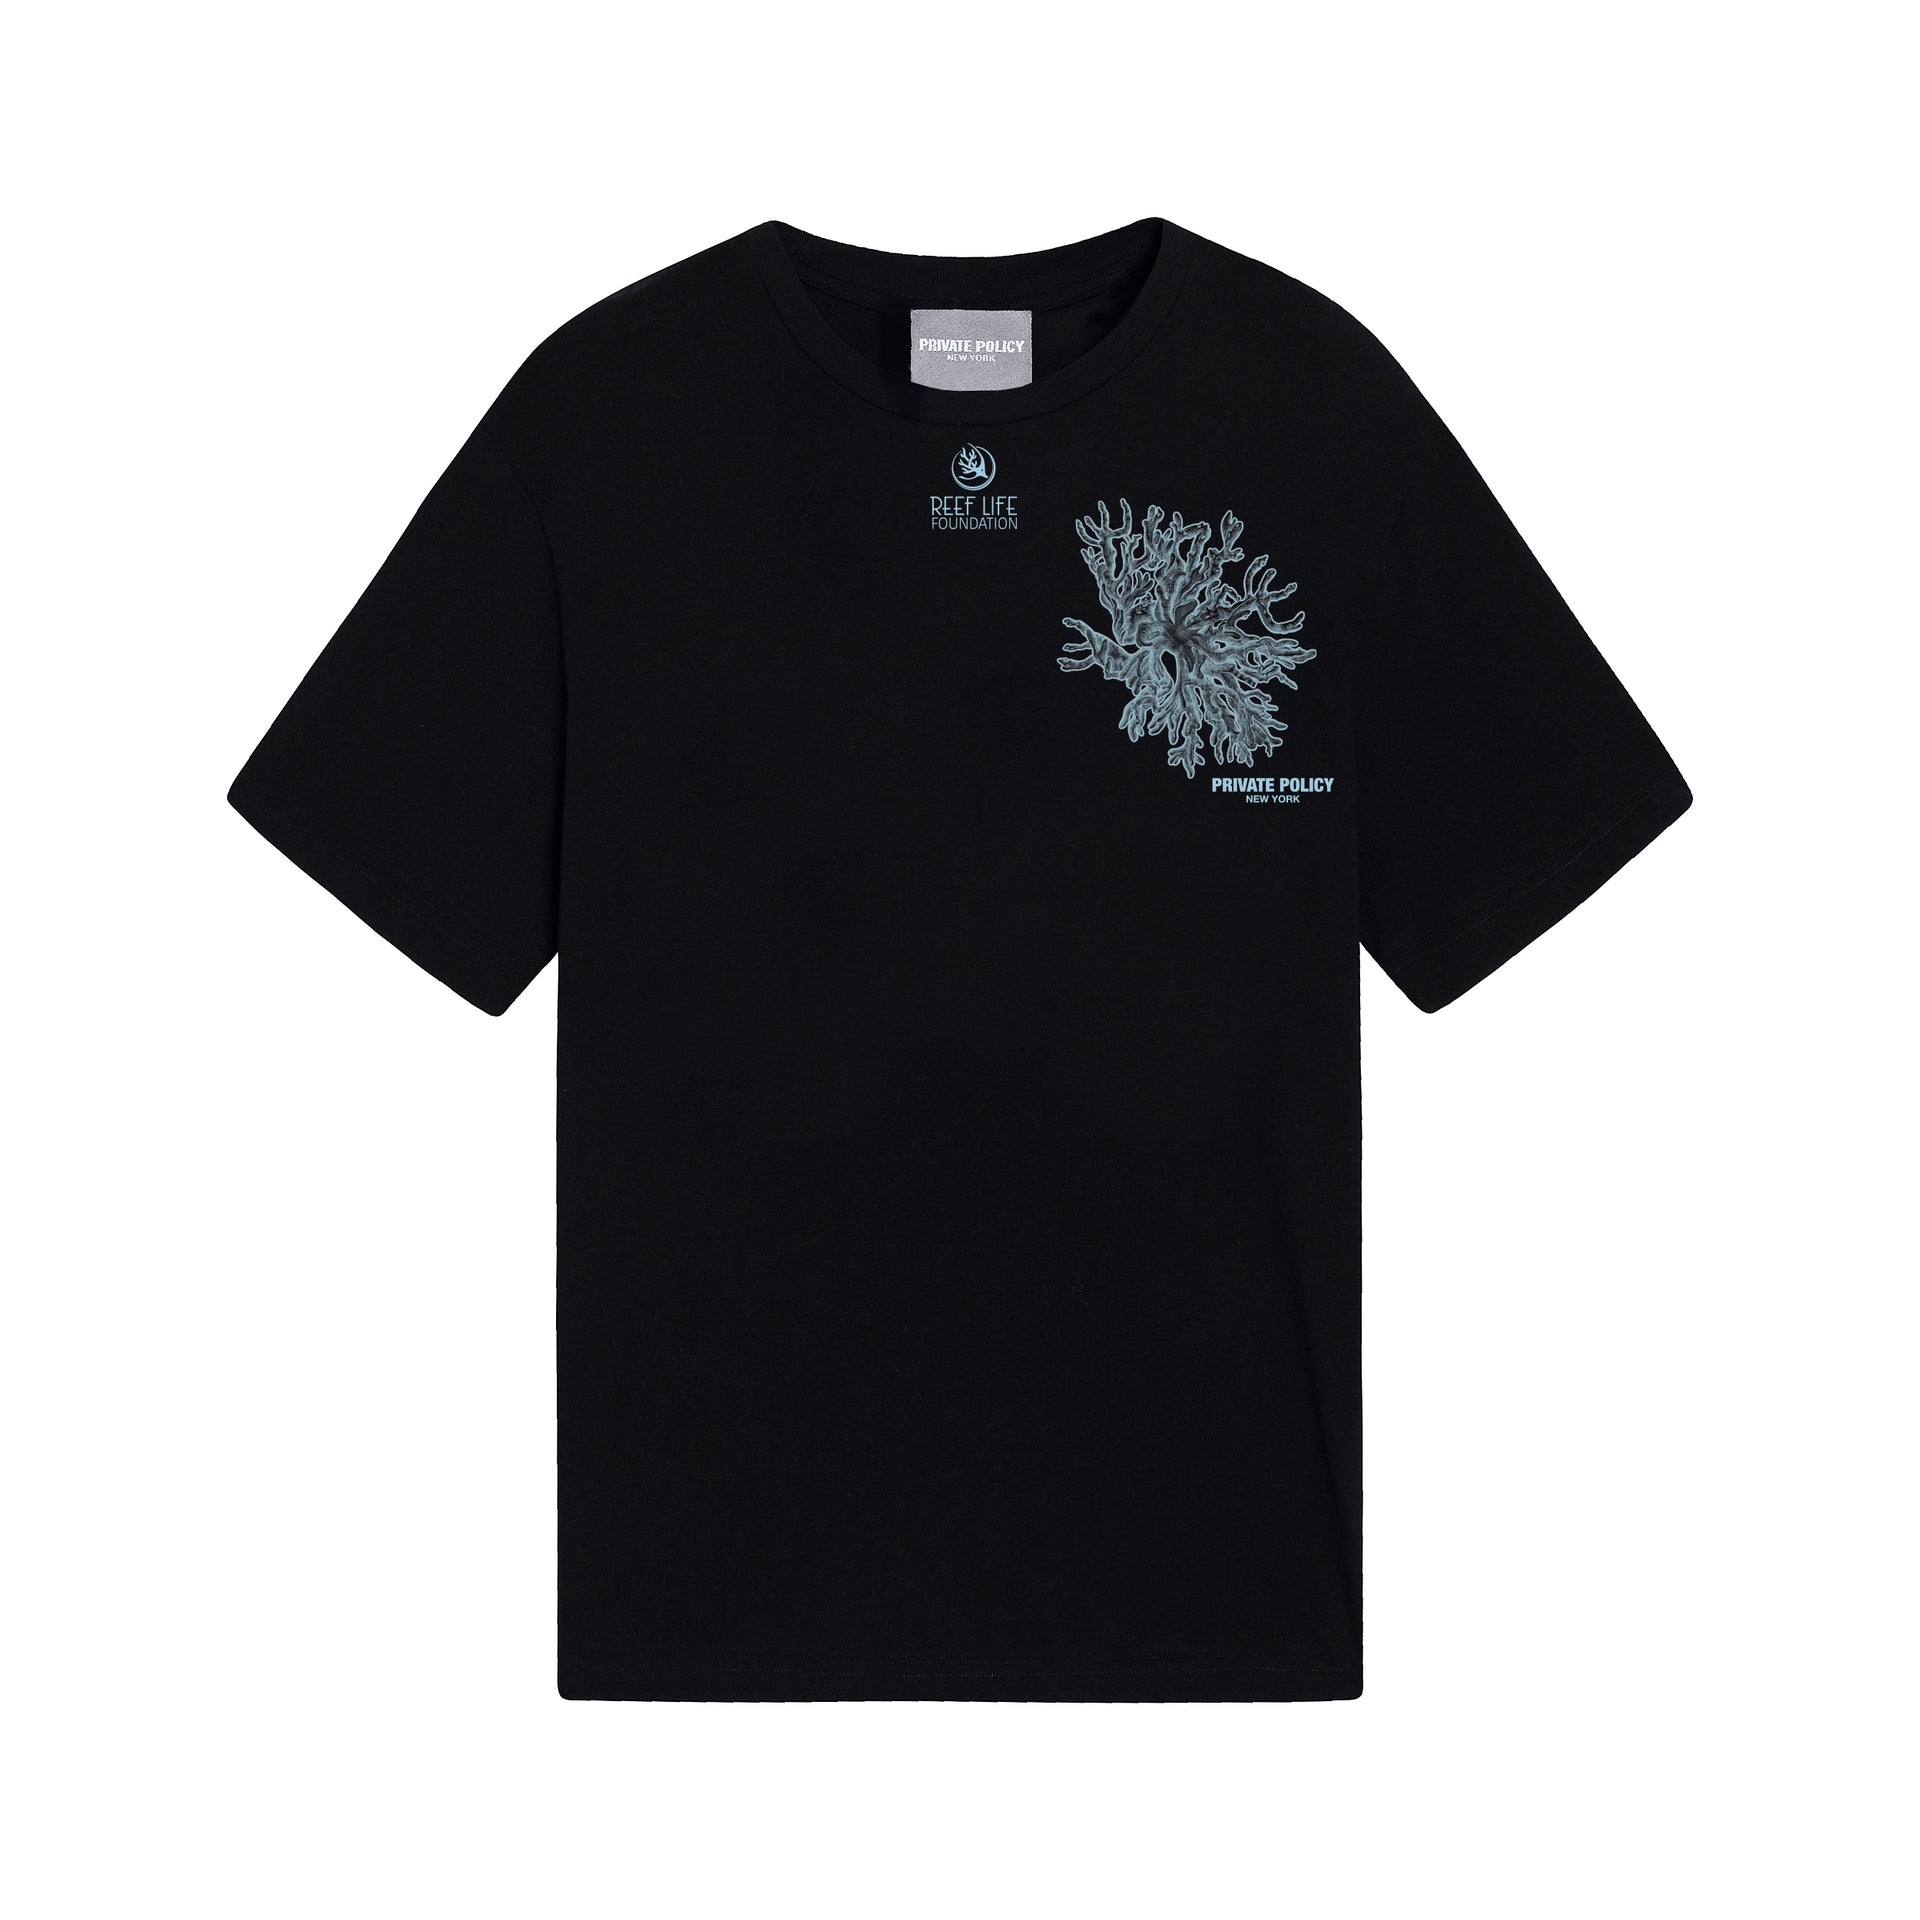 PRE-ORDER Reef Life Foundation x PRIVATE POLICY Collaboration T-shirt